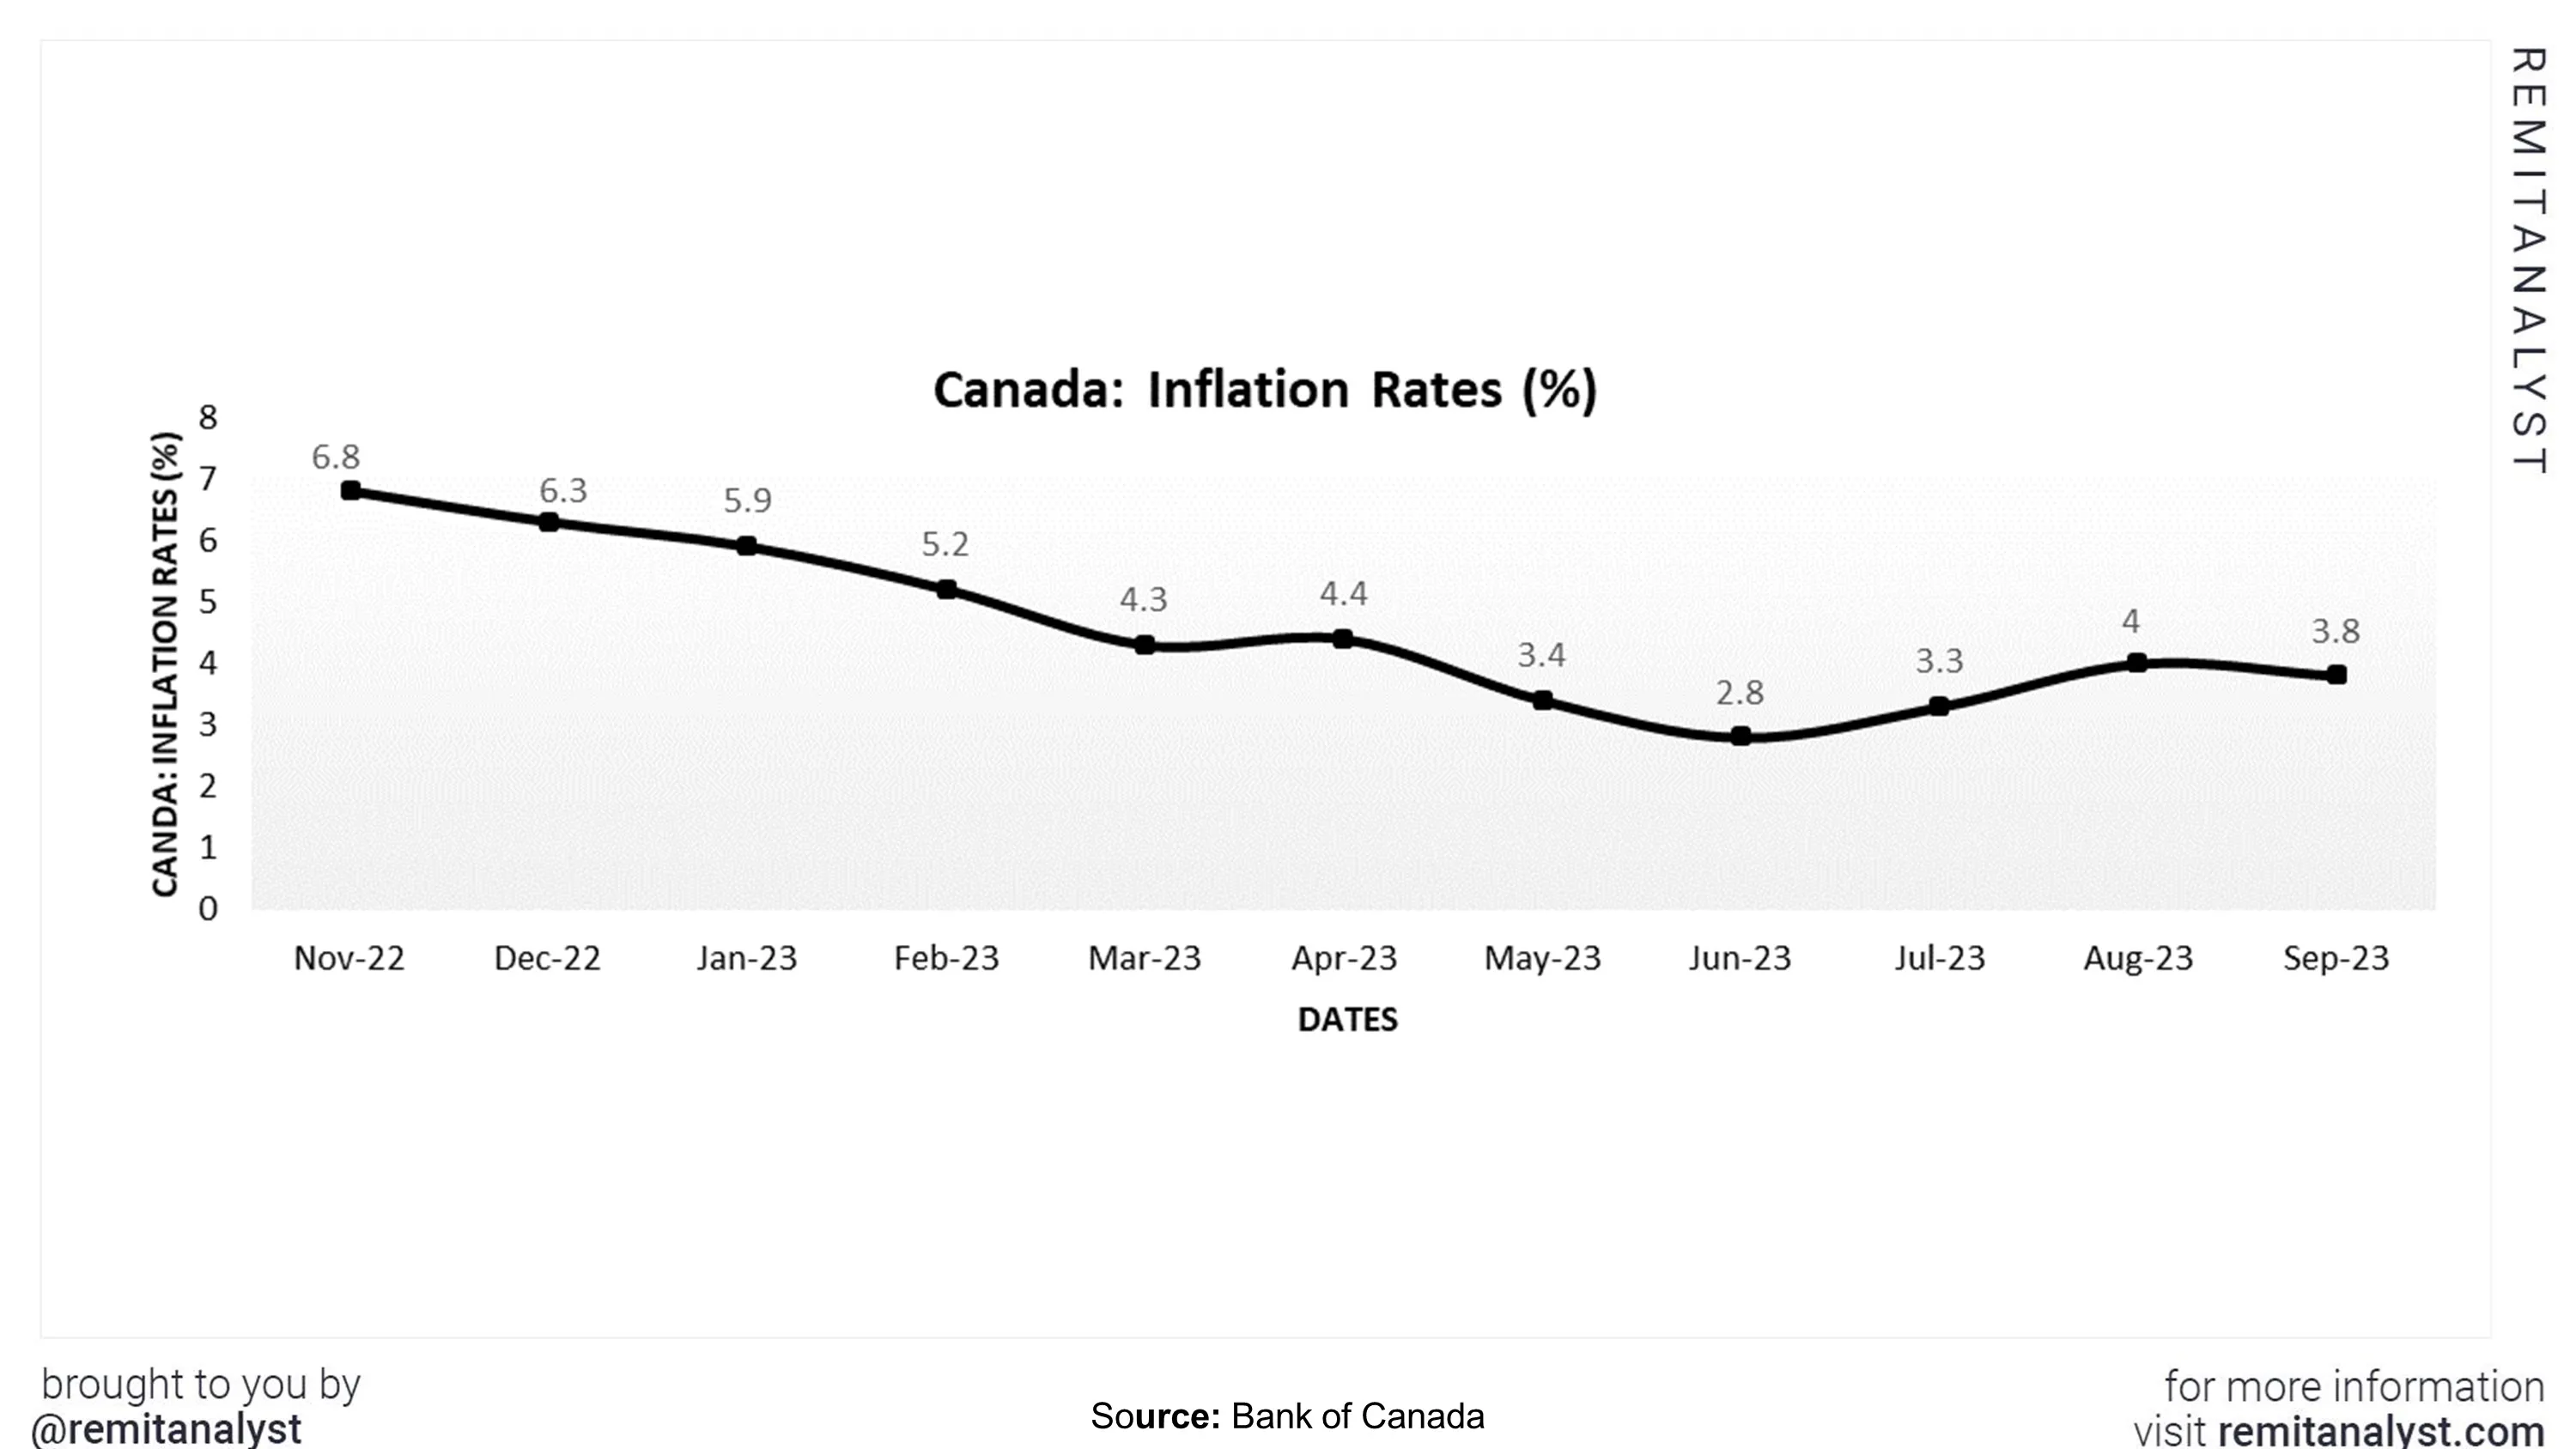 inflation-rates-canada-from-nov-2022-to-sep-2023